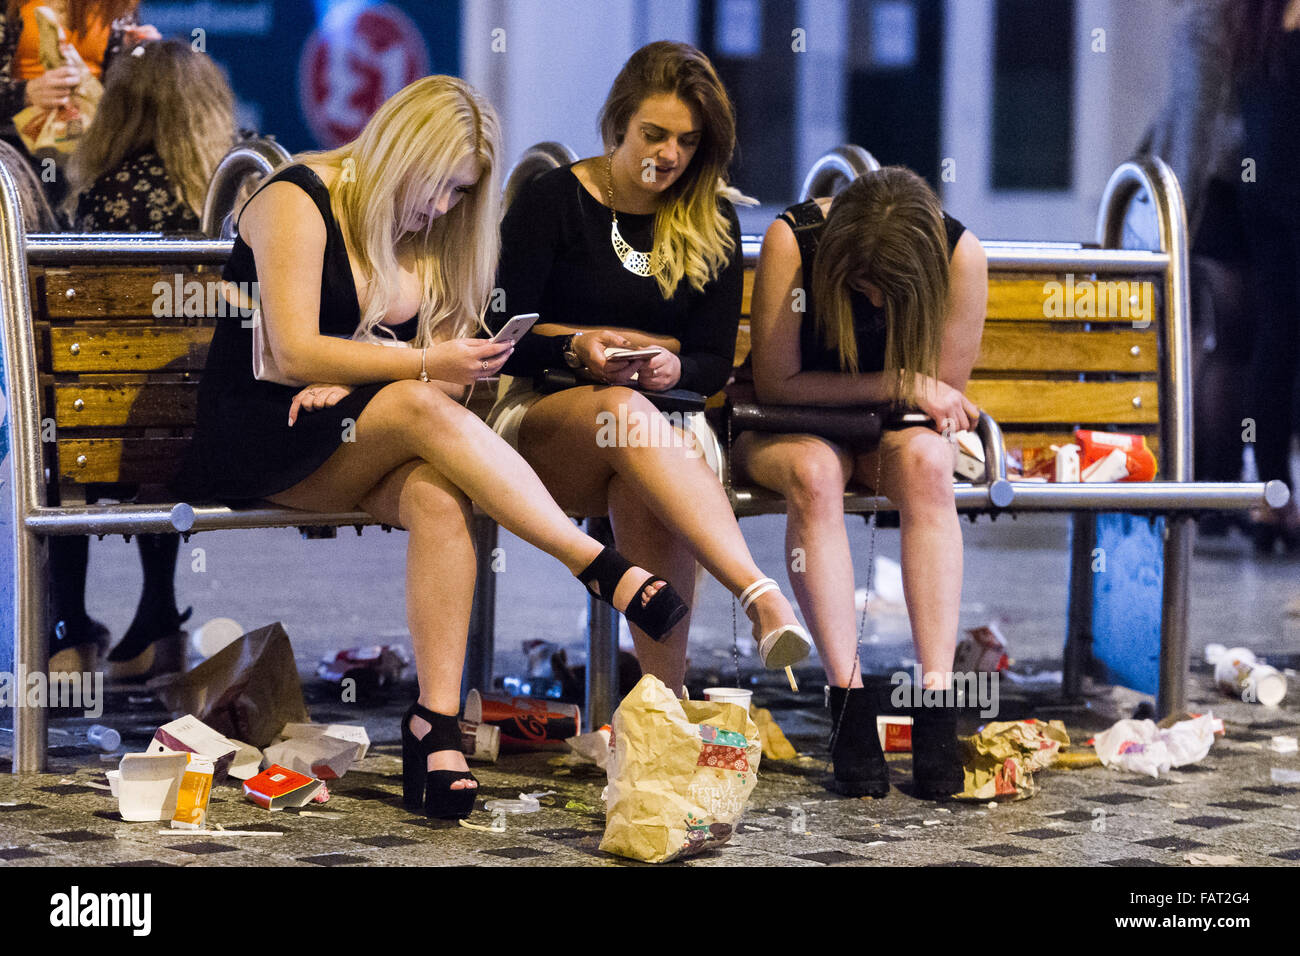 Pictured: A group of women sit on a bench, surrounded by discarded fast food packaging. Re: New Year's Eve in Cardiff, South Wal Stock Photo